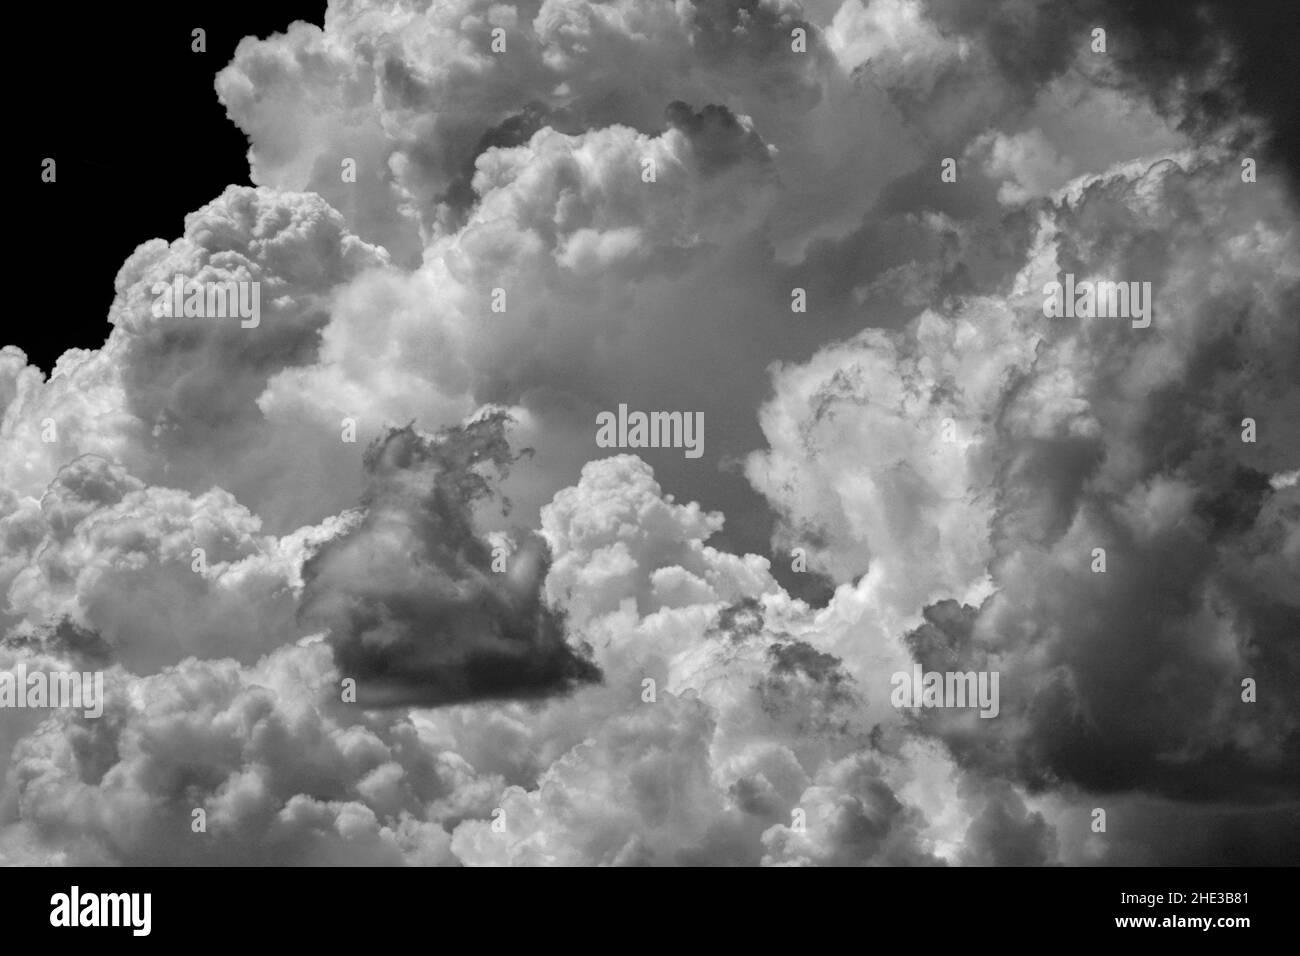 Darkening cumulus clouds form in the sky over the American Southwest. Stock Photo